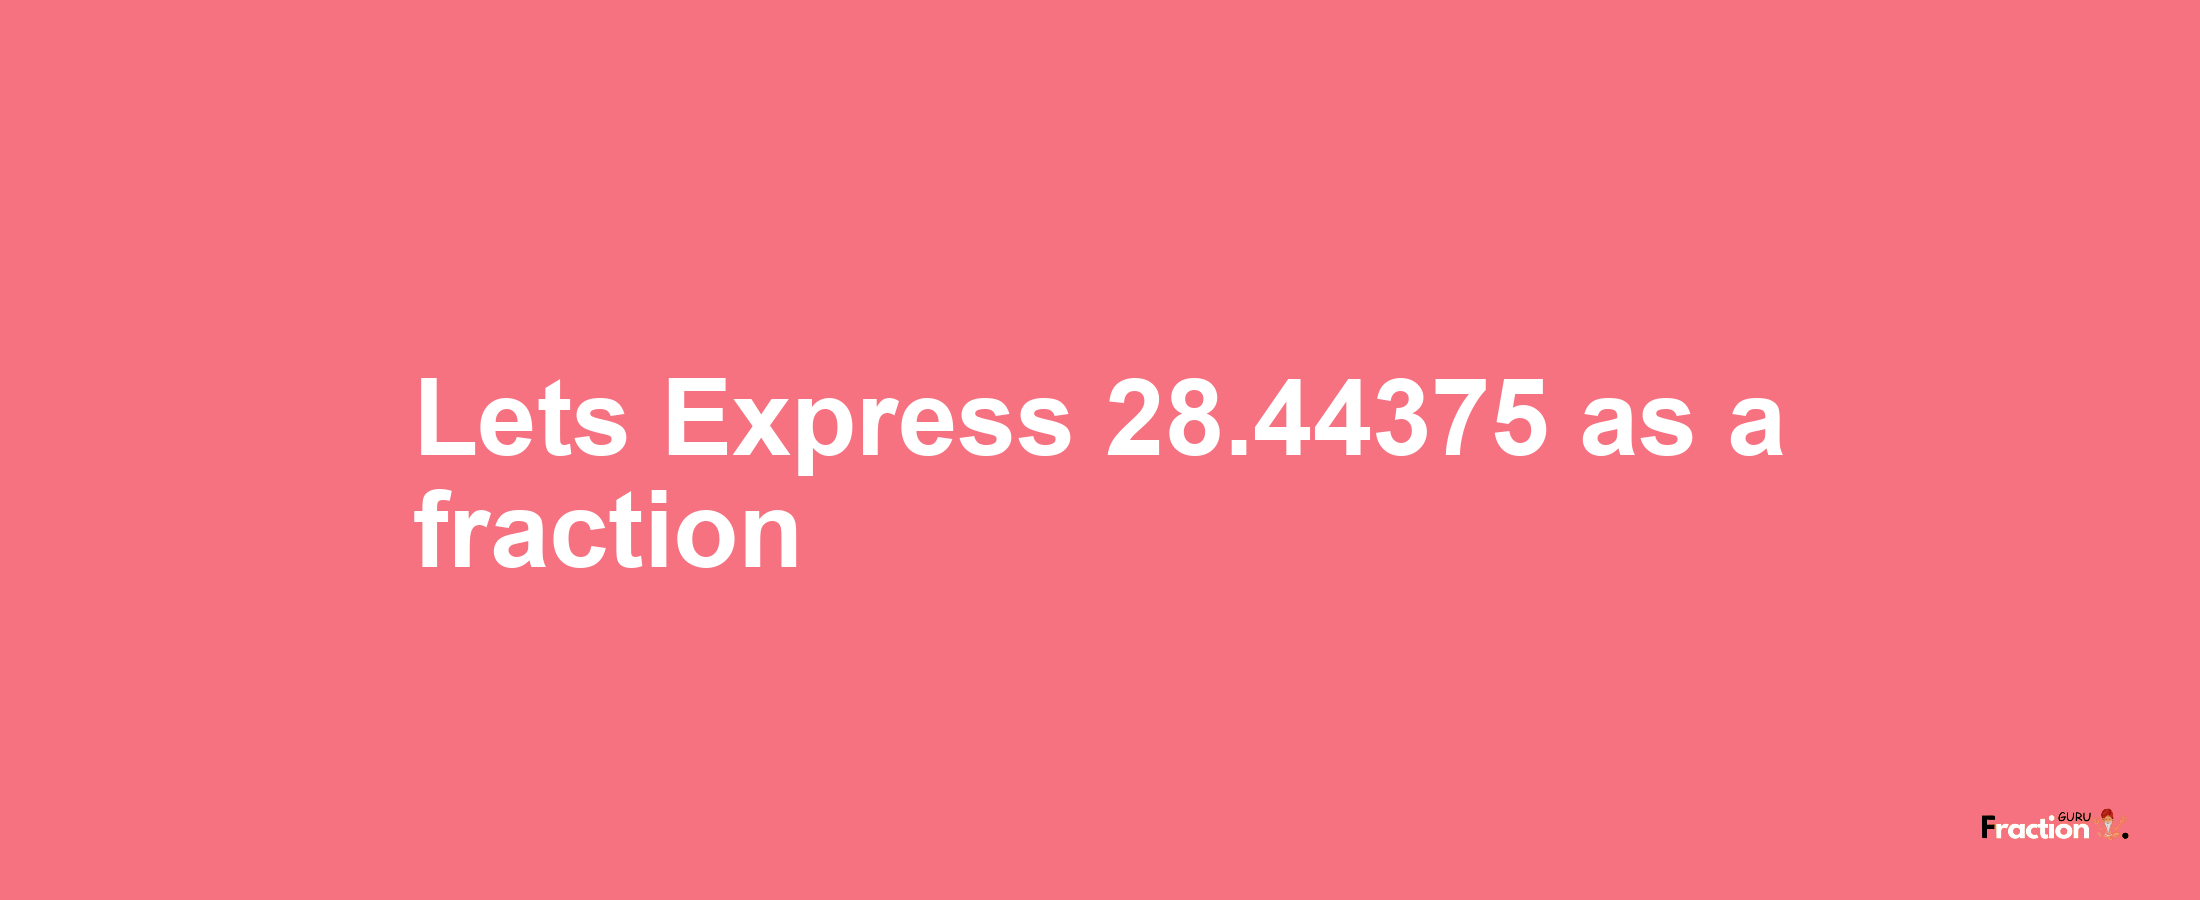 Lets Express 28.44375 as afraction